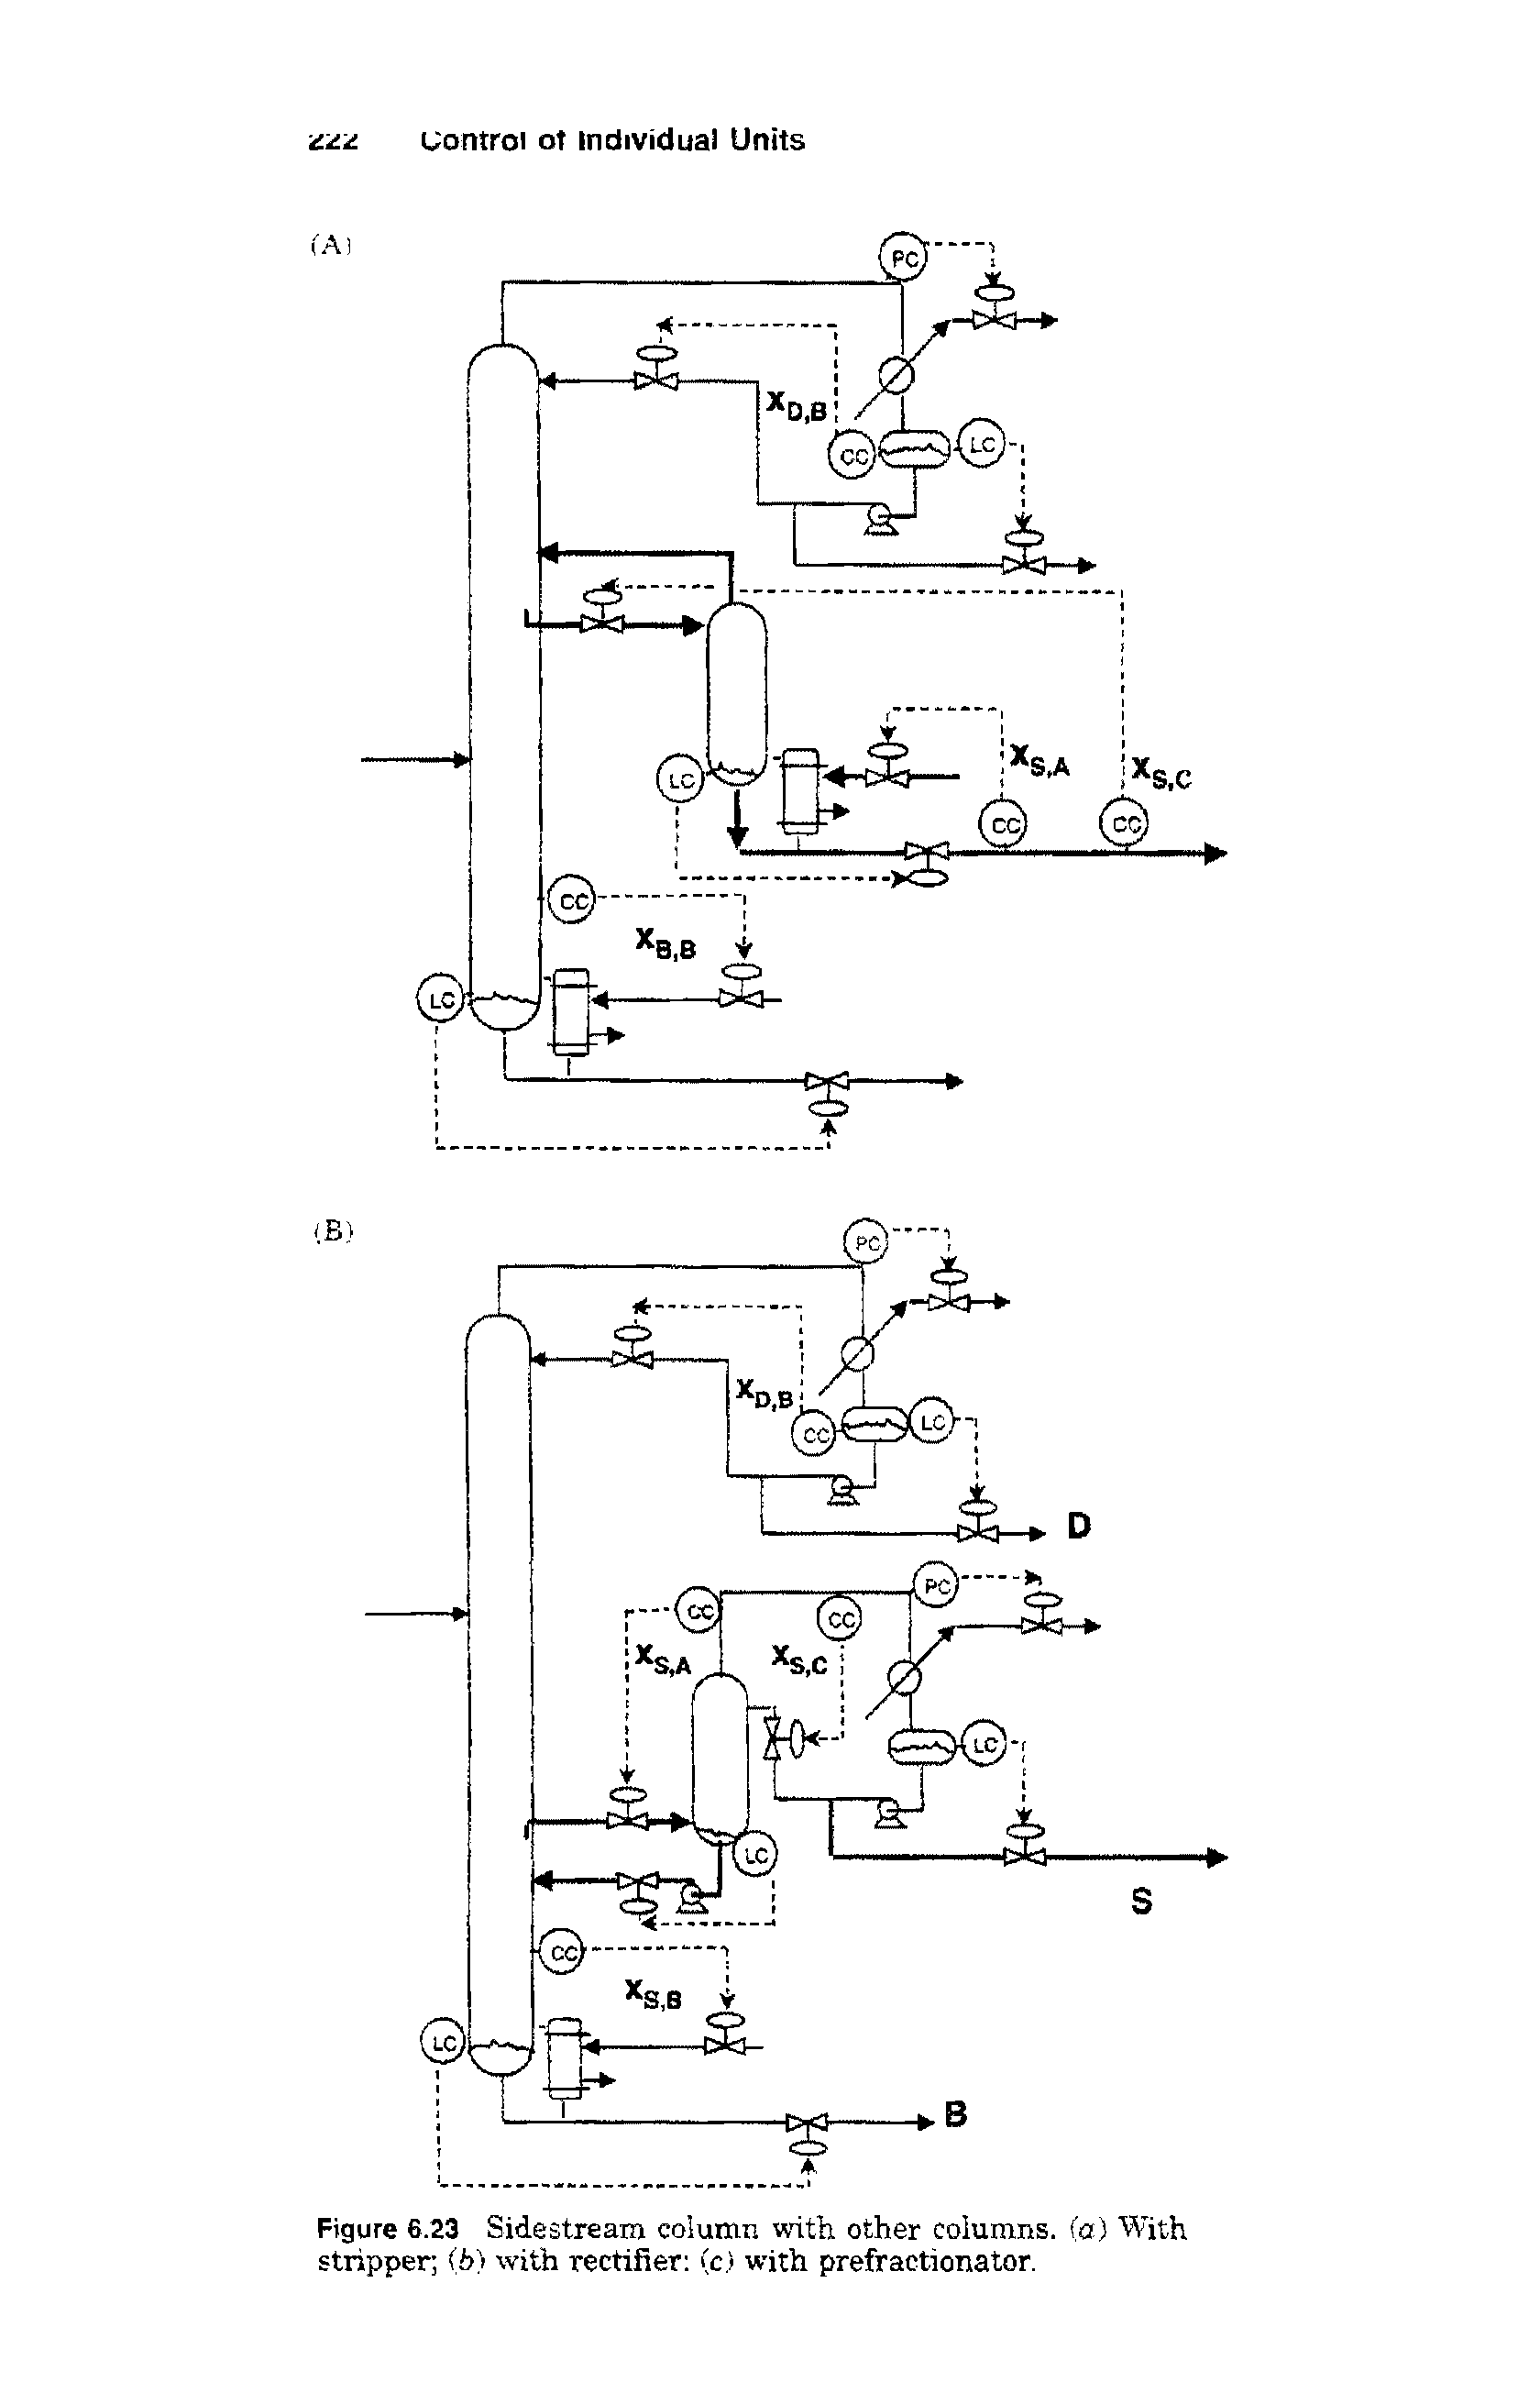 Figure 6.23 Sidestream column with other columns, (a) With stripper (b) with rectifier (c) with prefractionator.